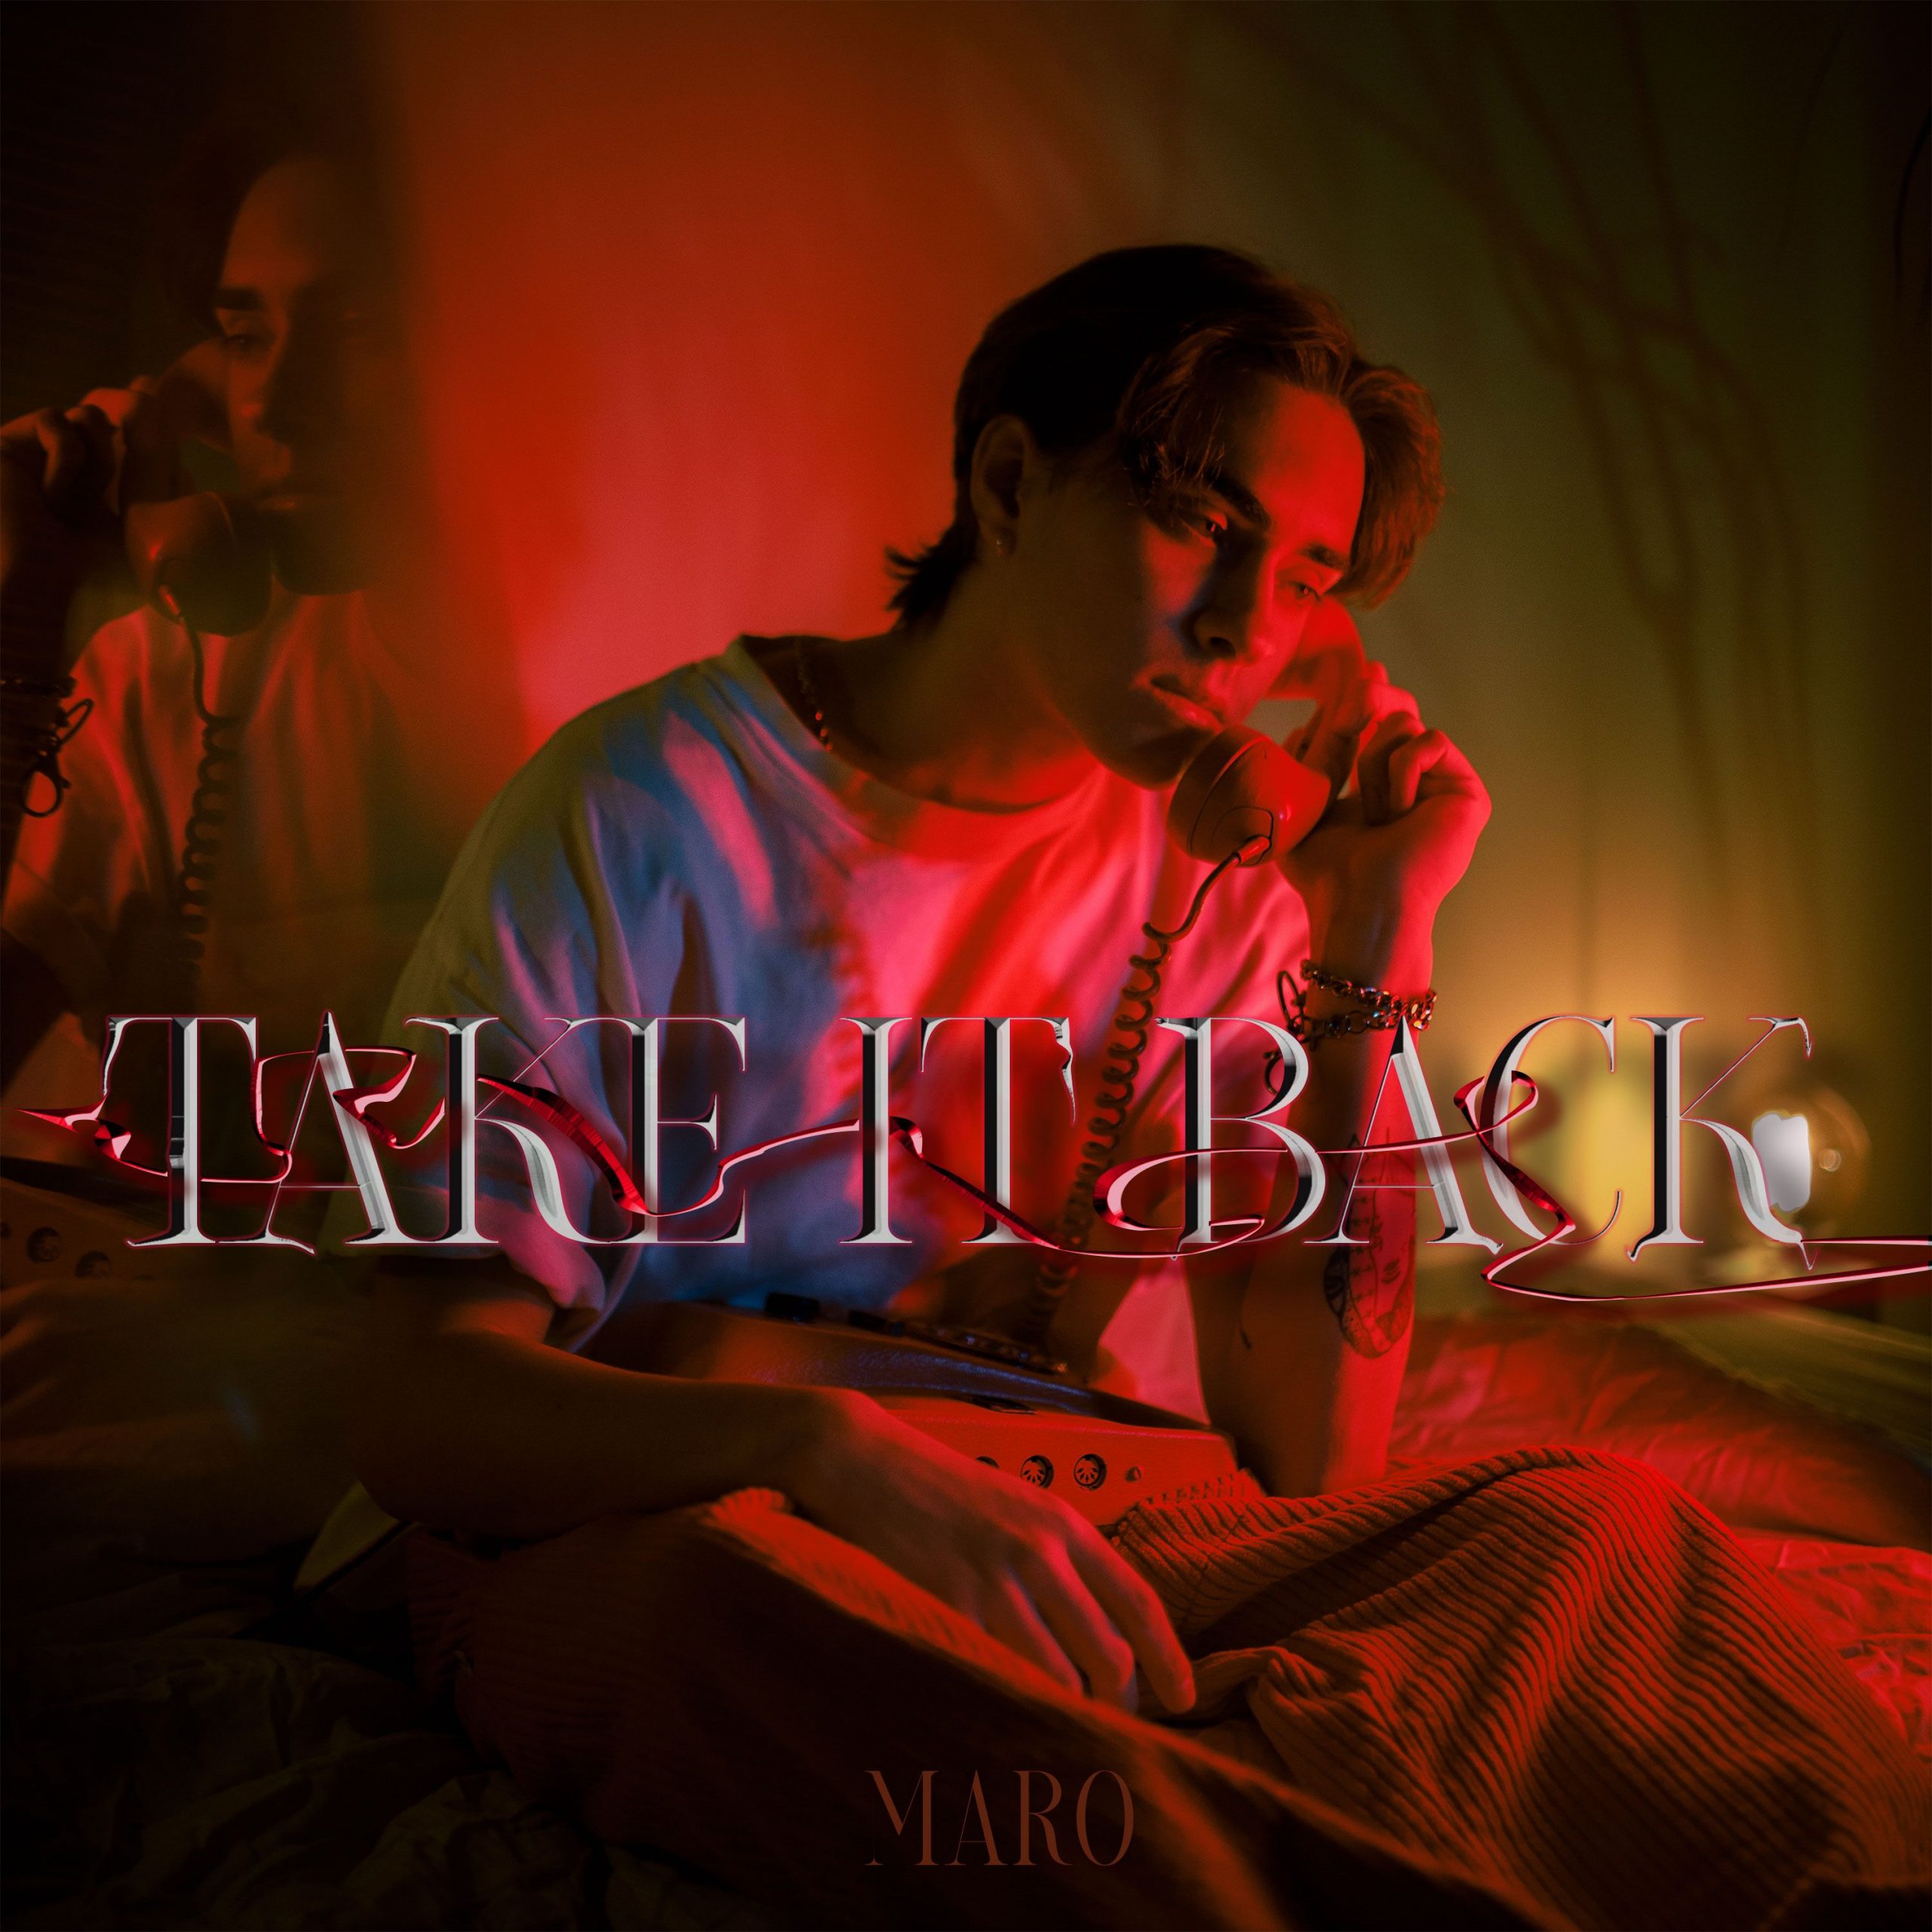 take it back - maro - lebanon - indie - indie music - indie pop - new music - music blog - wolf in a suit - wolfinasuit - wolf in a suit blog - wolf in a suit music blog